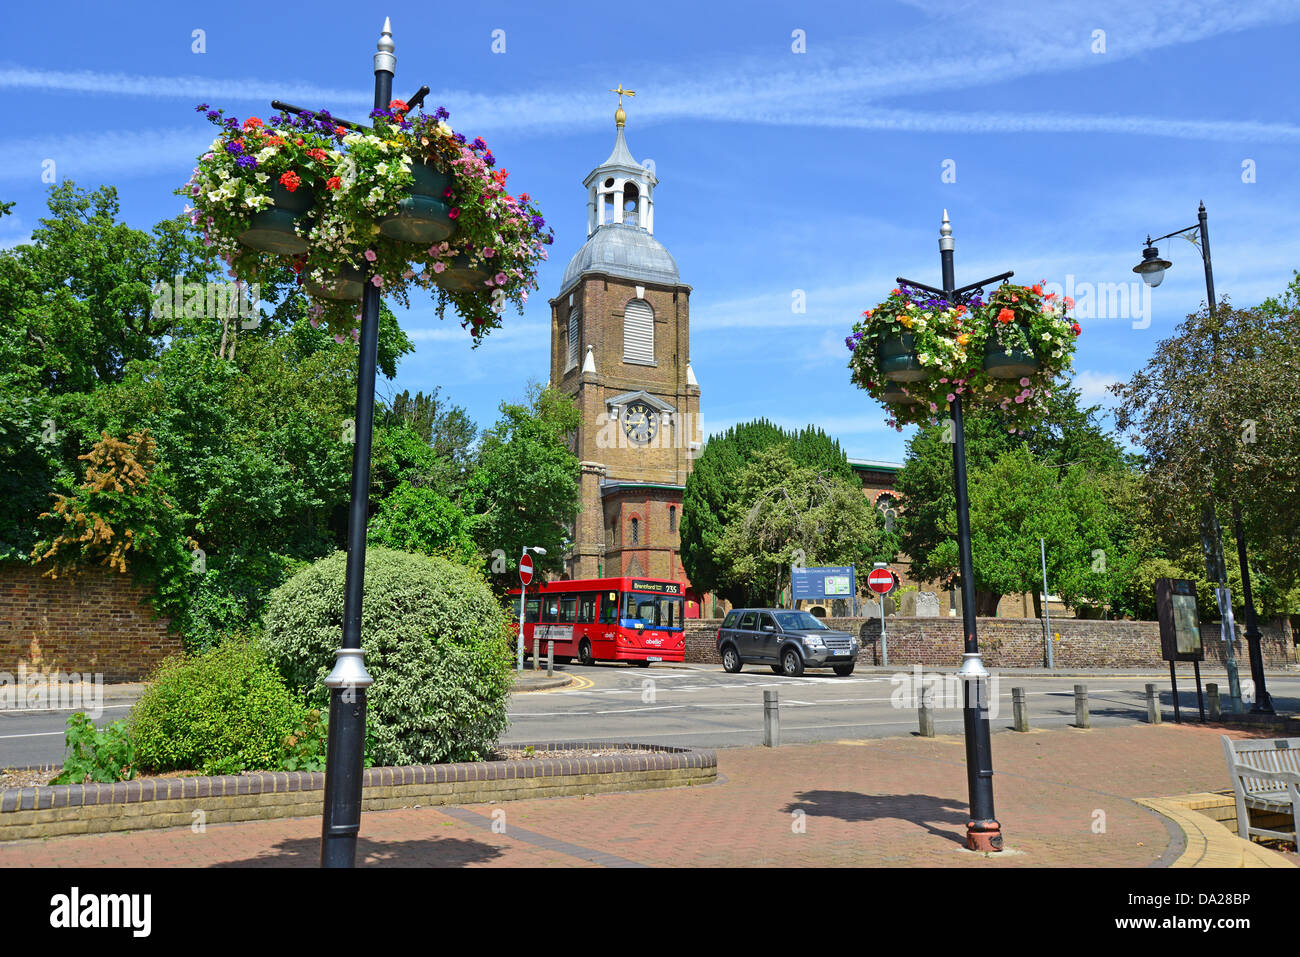 St Mary's Anglican Church, Church Street, Sunbury-on-Thames, Surrey, Angleterre, Royaume-Uni Banque D'Images